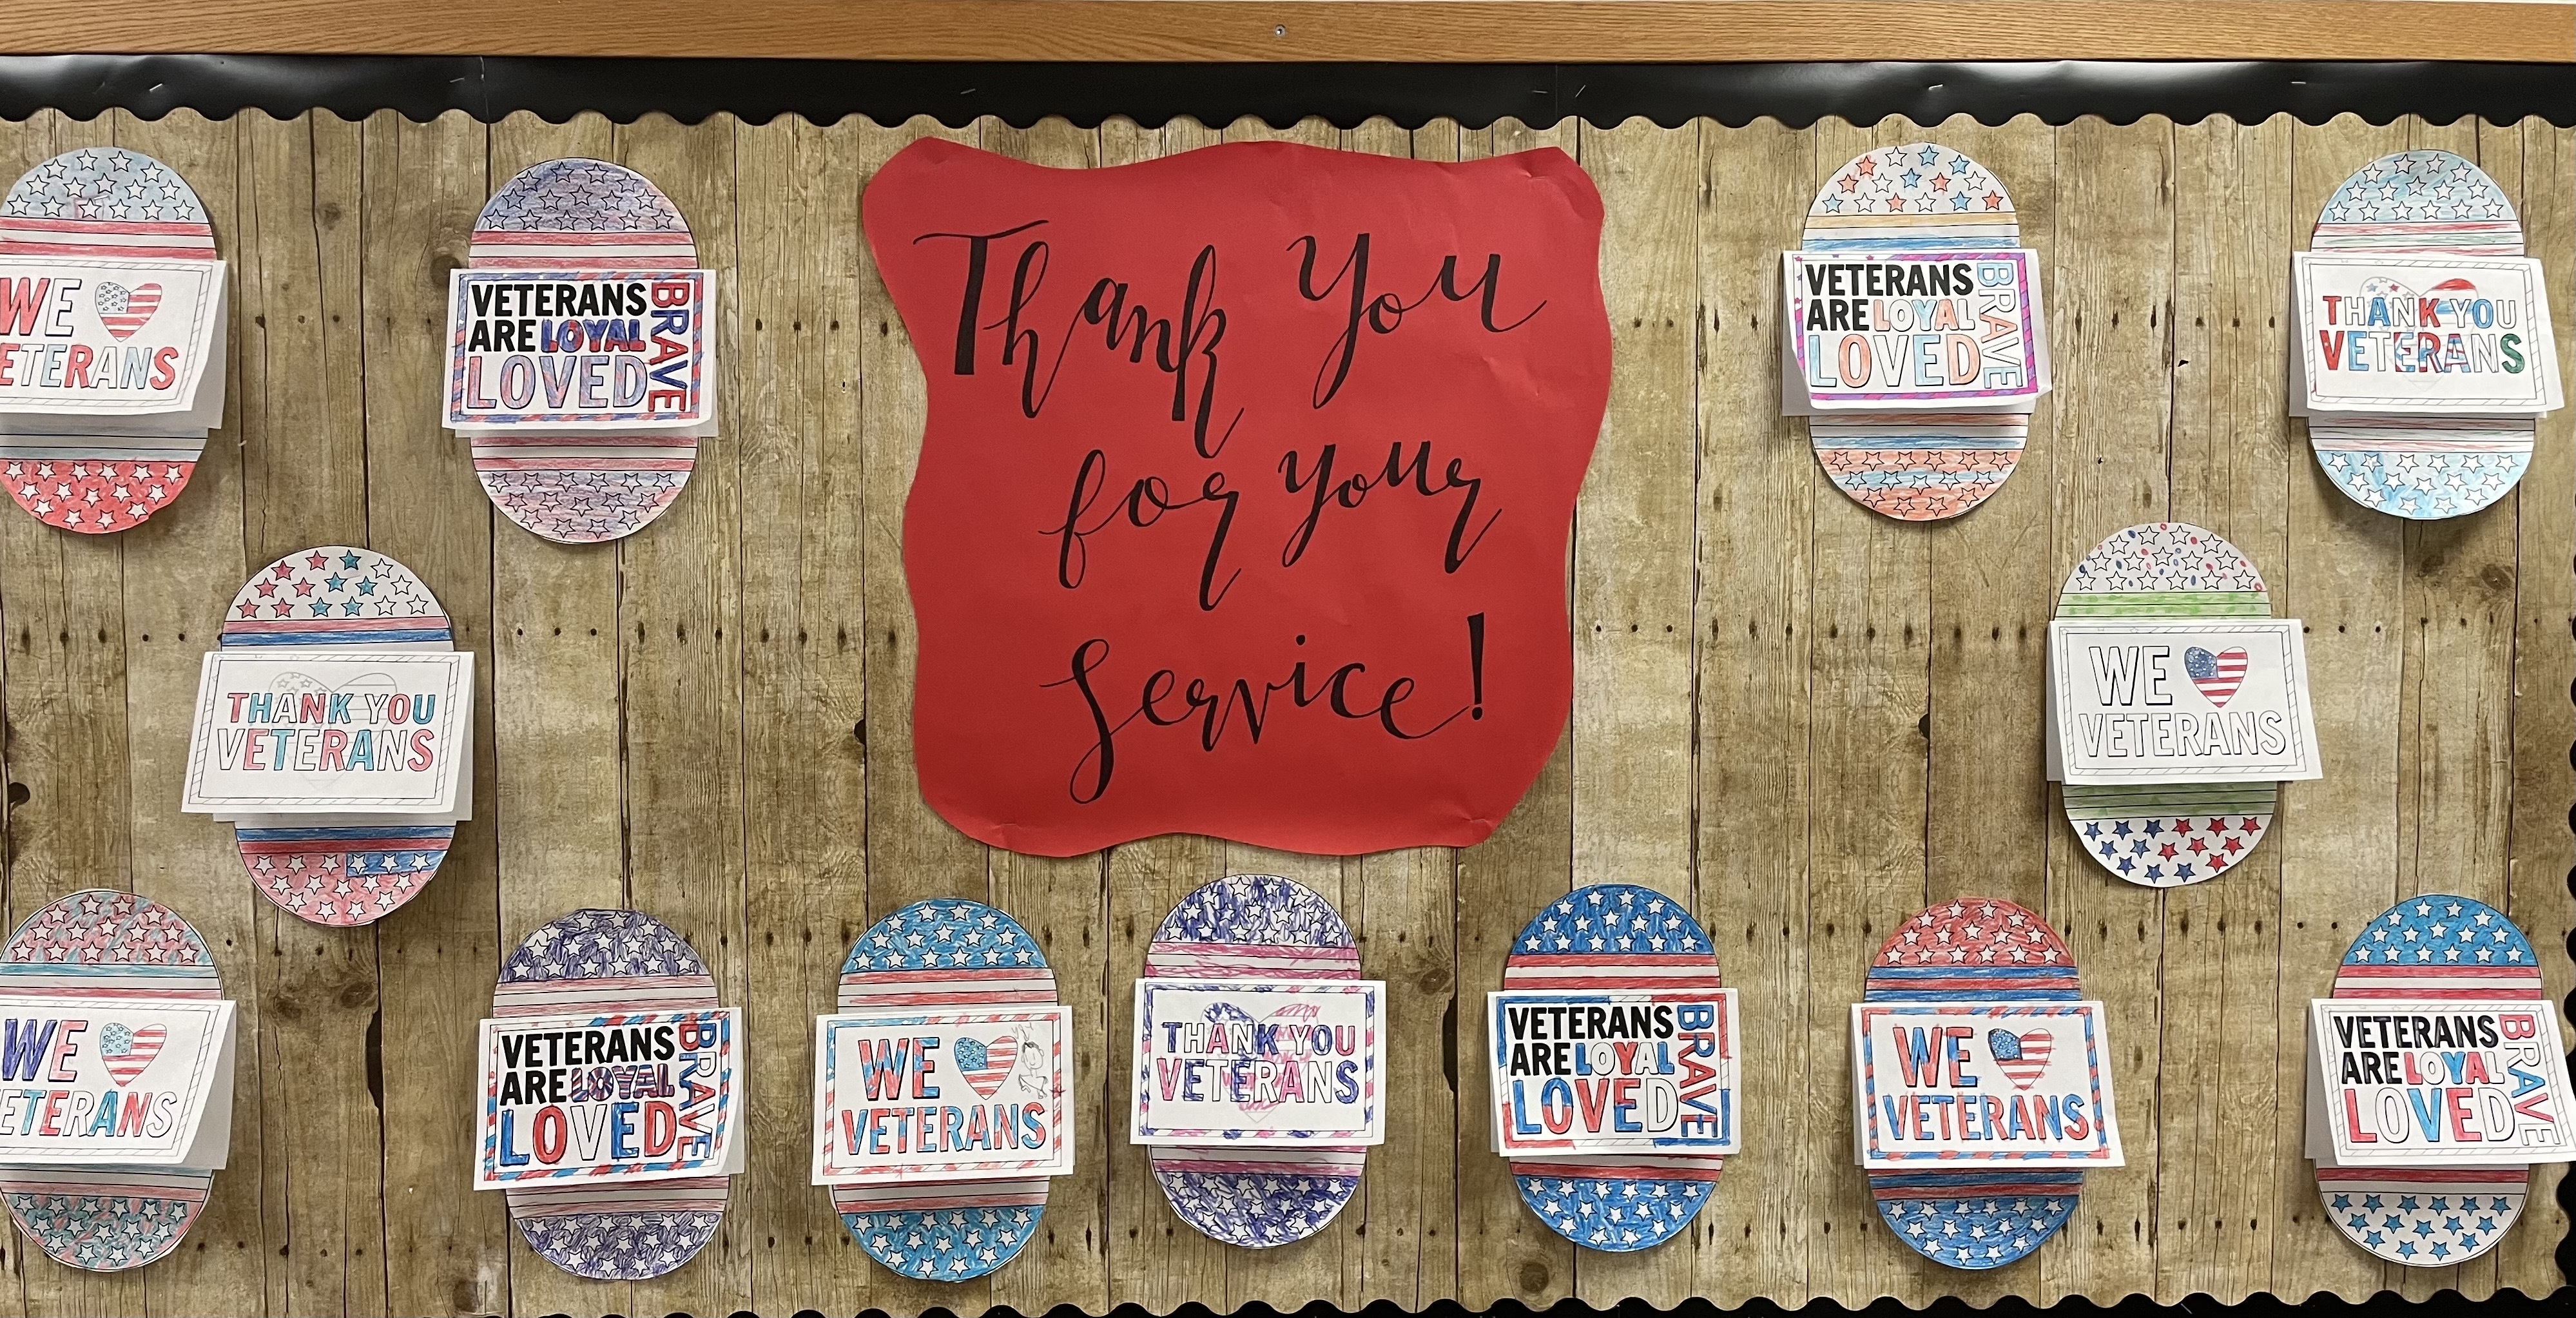 Veterans Day Craft Activity by Teach Starter on display for Veterans Day at School